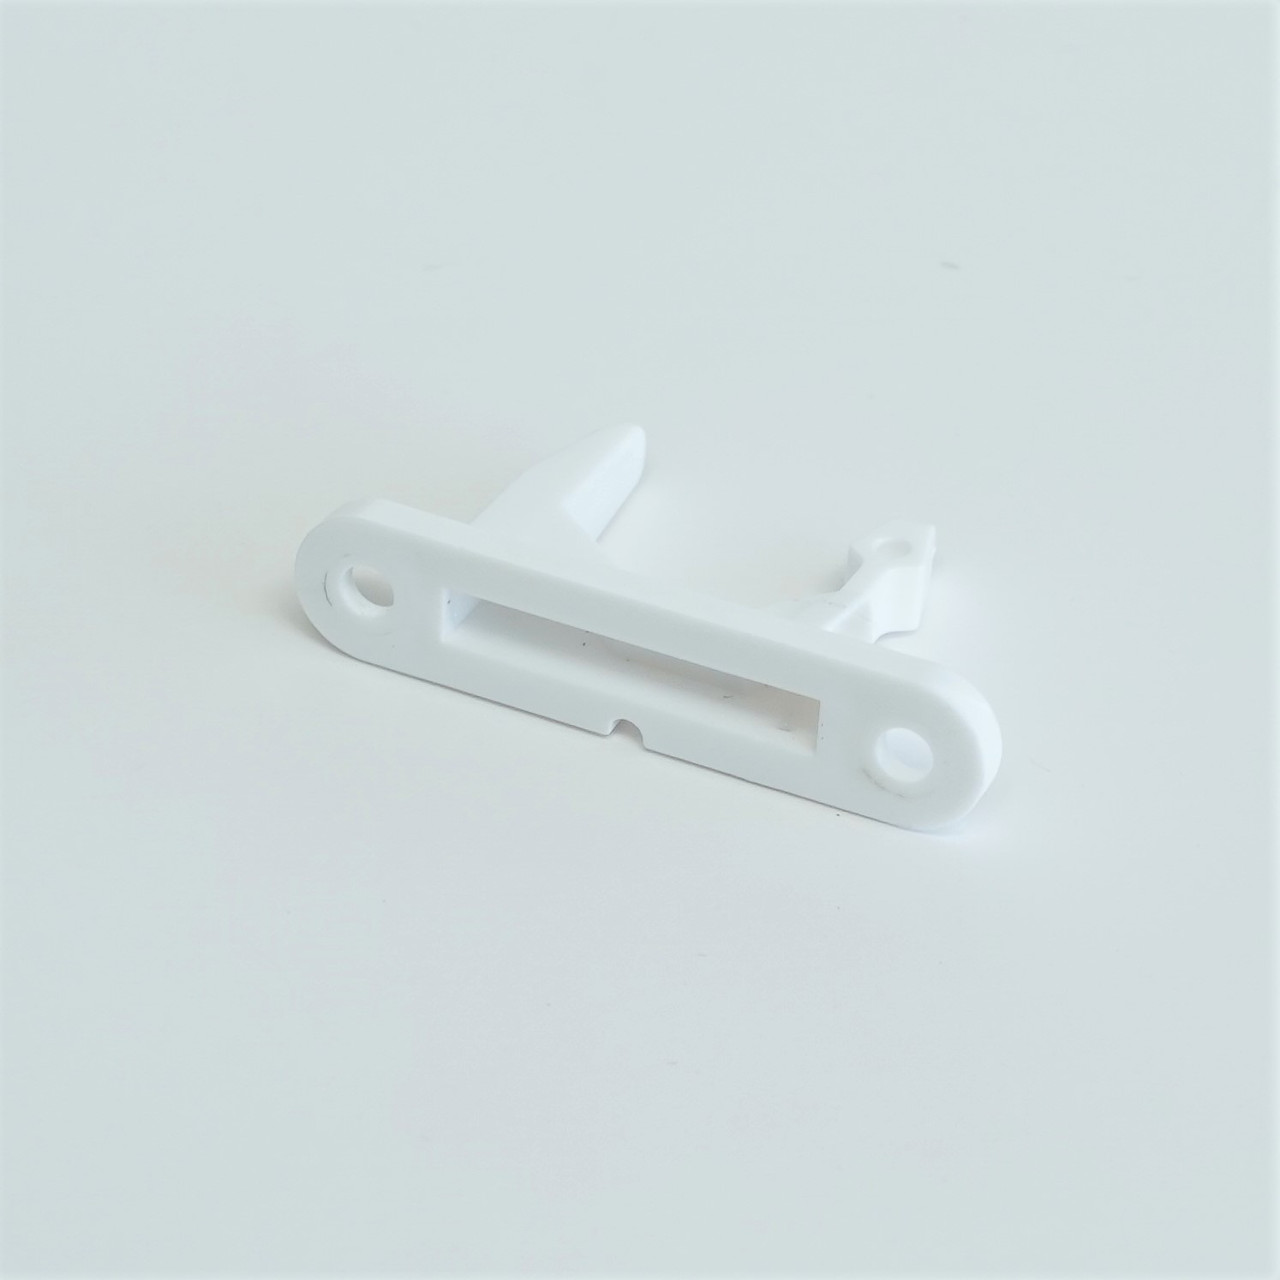 Supco Washer Door Strike for Frigidaire | McCombs Supply | 131763310